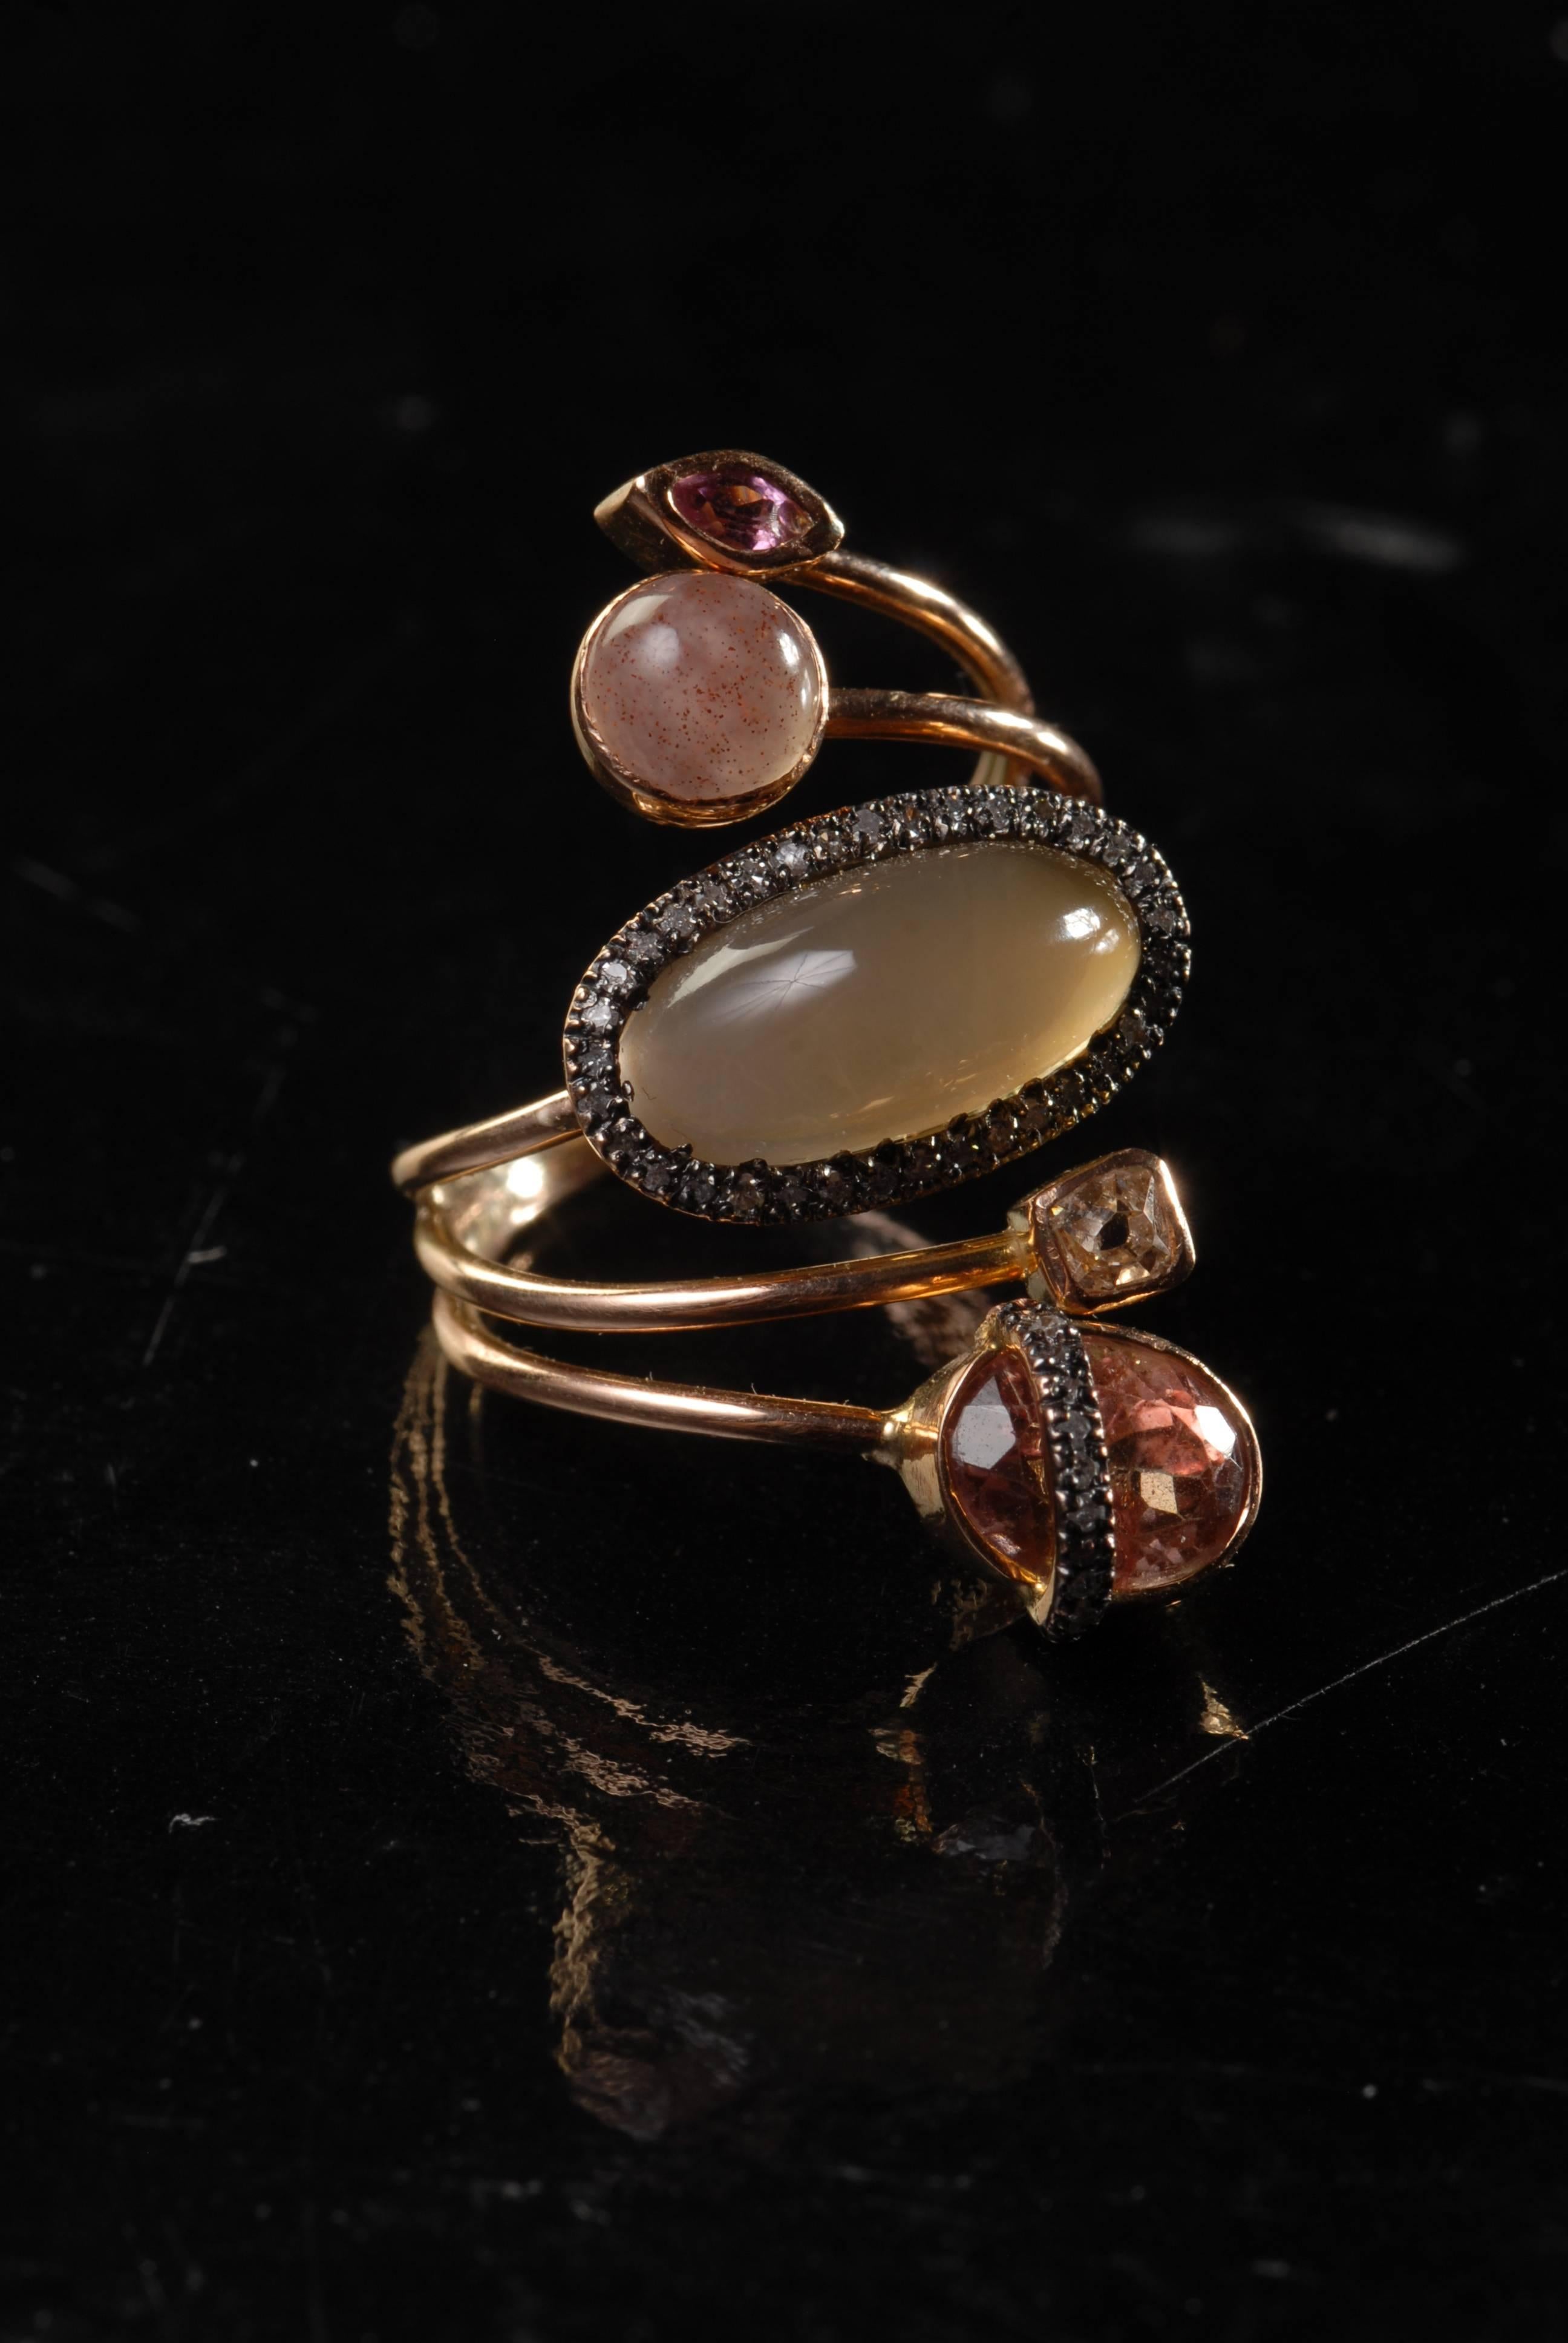 This spiral, branched handmade 14 carat rose gold ring is made with grey oval chalcedony, surrounded by small diamonds, round rose chalcedony, oval rose sapphire with a band of small diamonds on top and small square colored diamond and marquise-cut